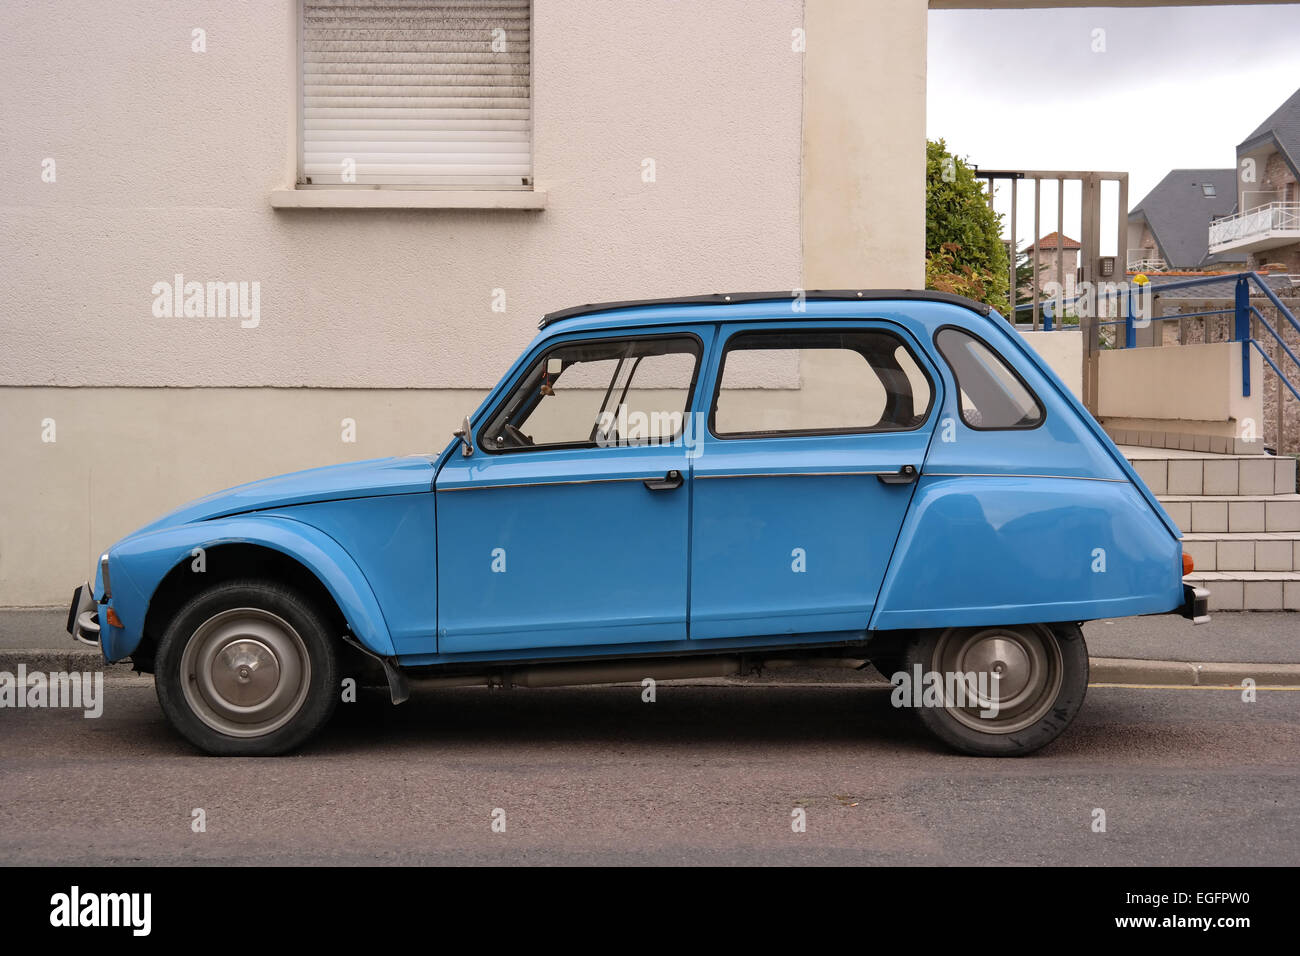 FRANCE - JULY 2014 Classic vintage French 70s car Stock Photo